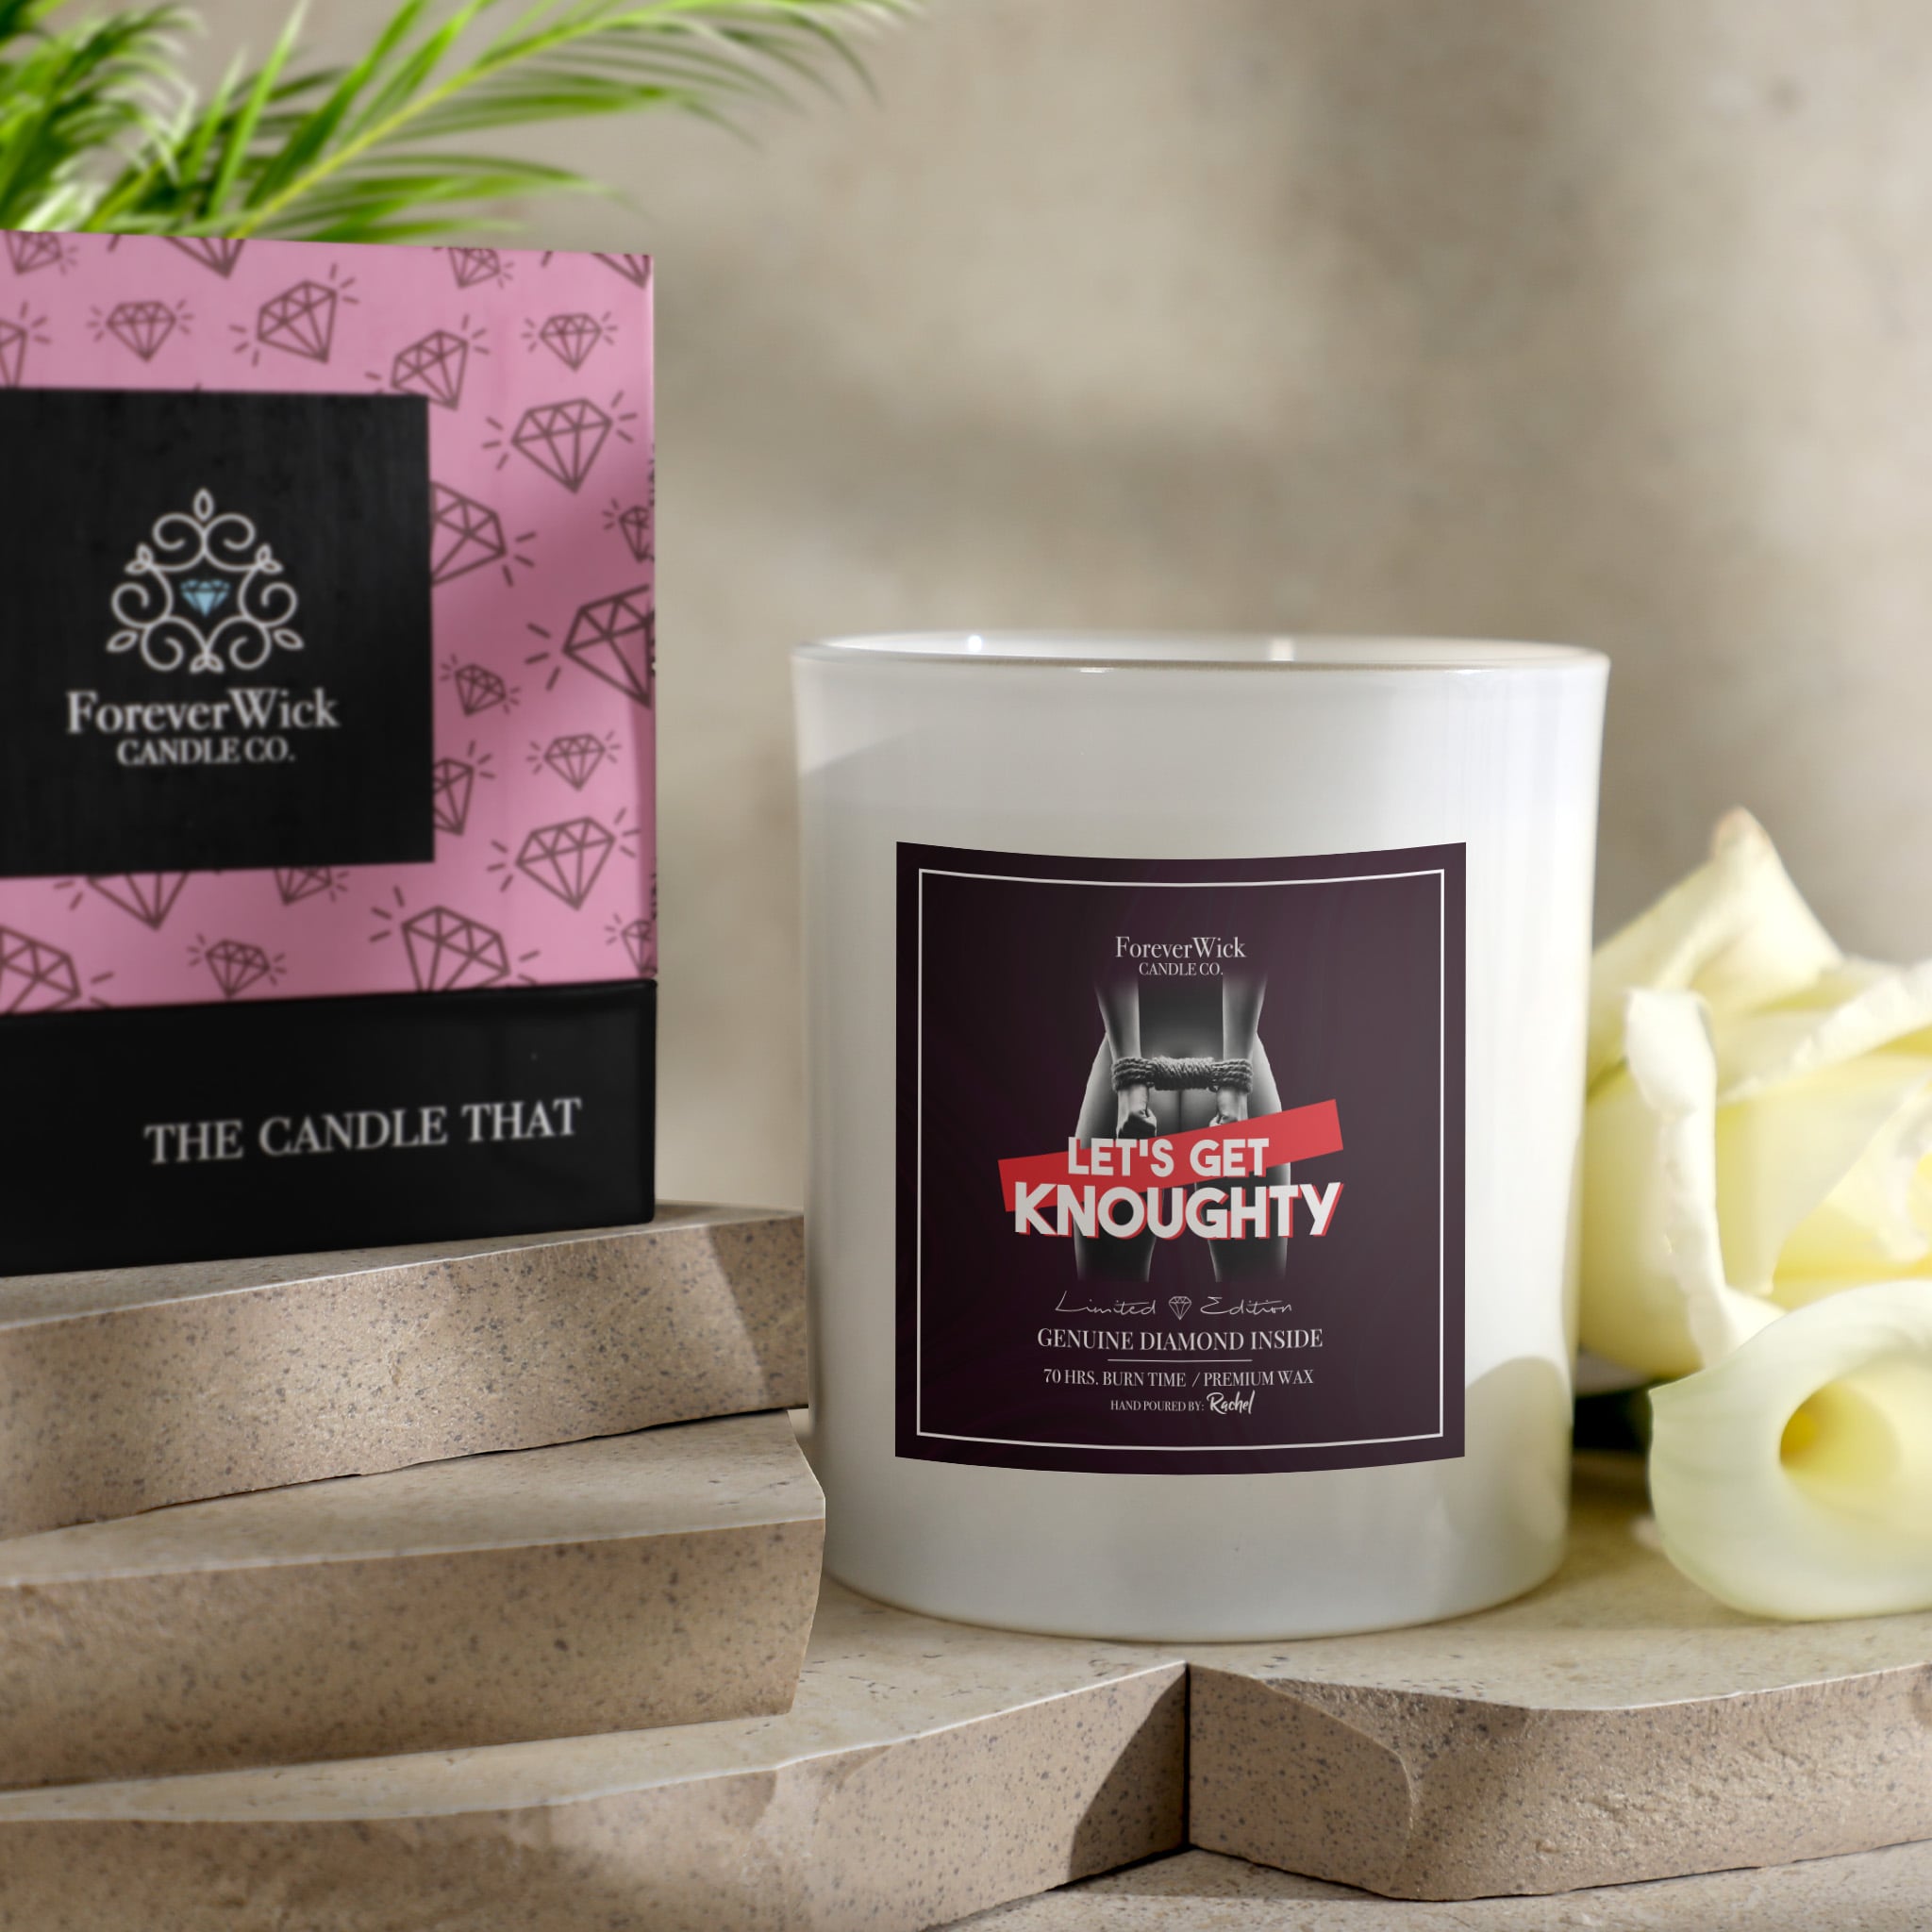 Let's Get Knoughty - Diamond Candle and Bath Bomb Set